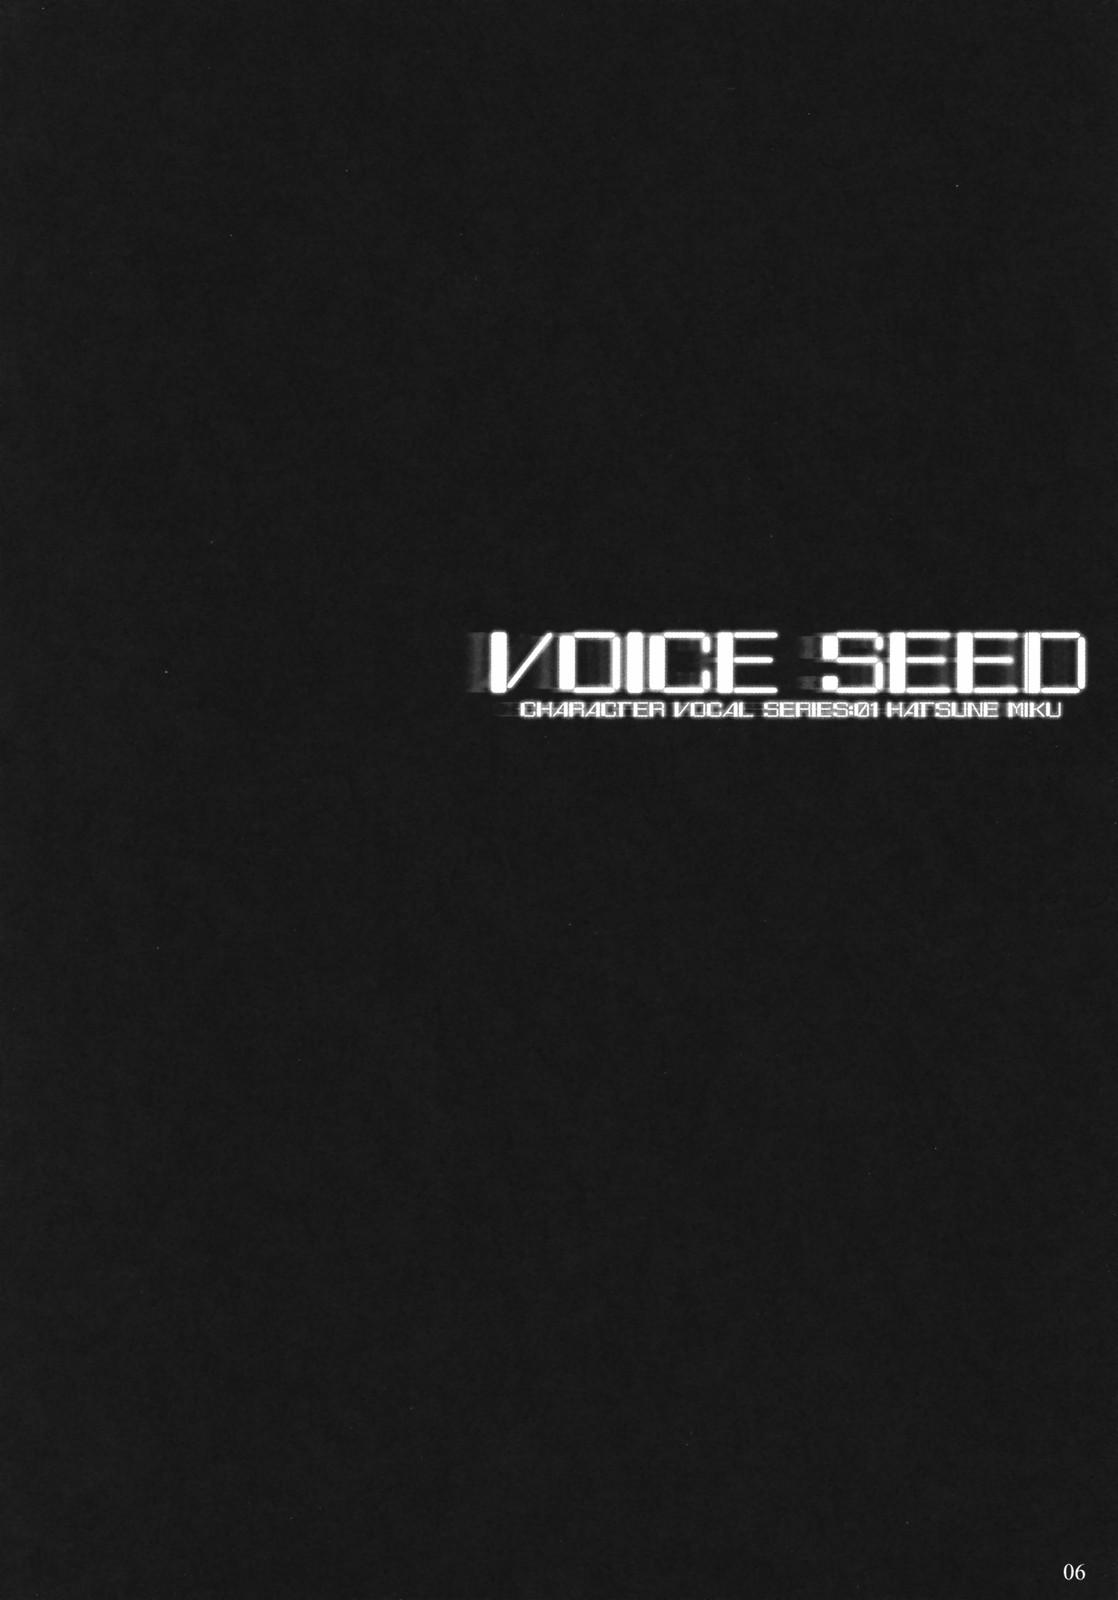 Voice Seed 4